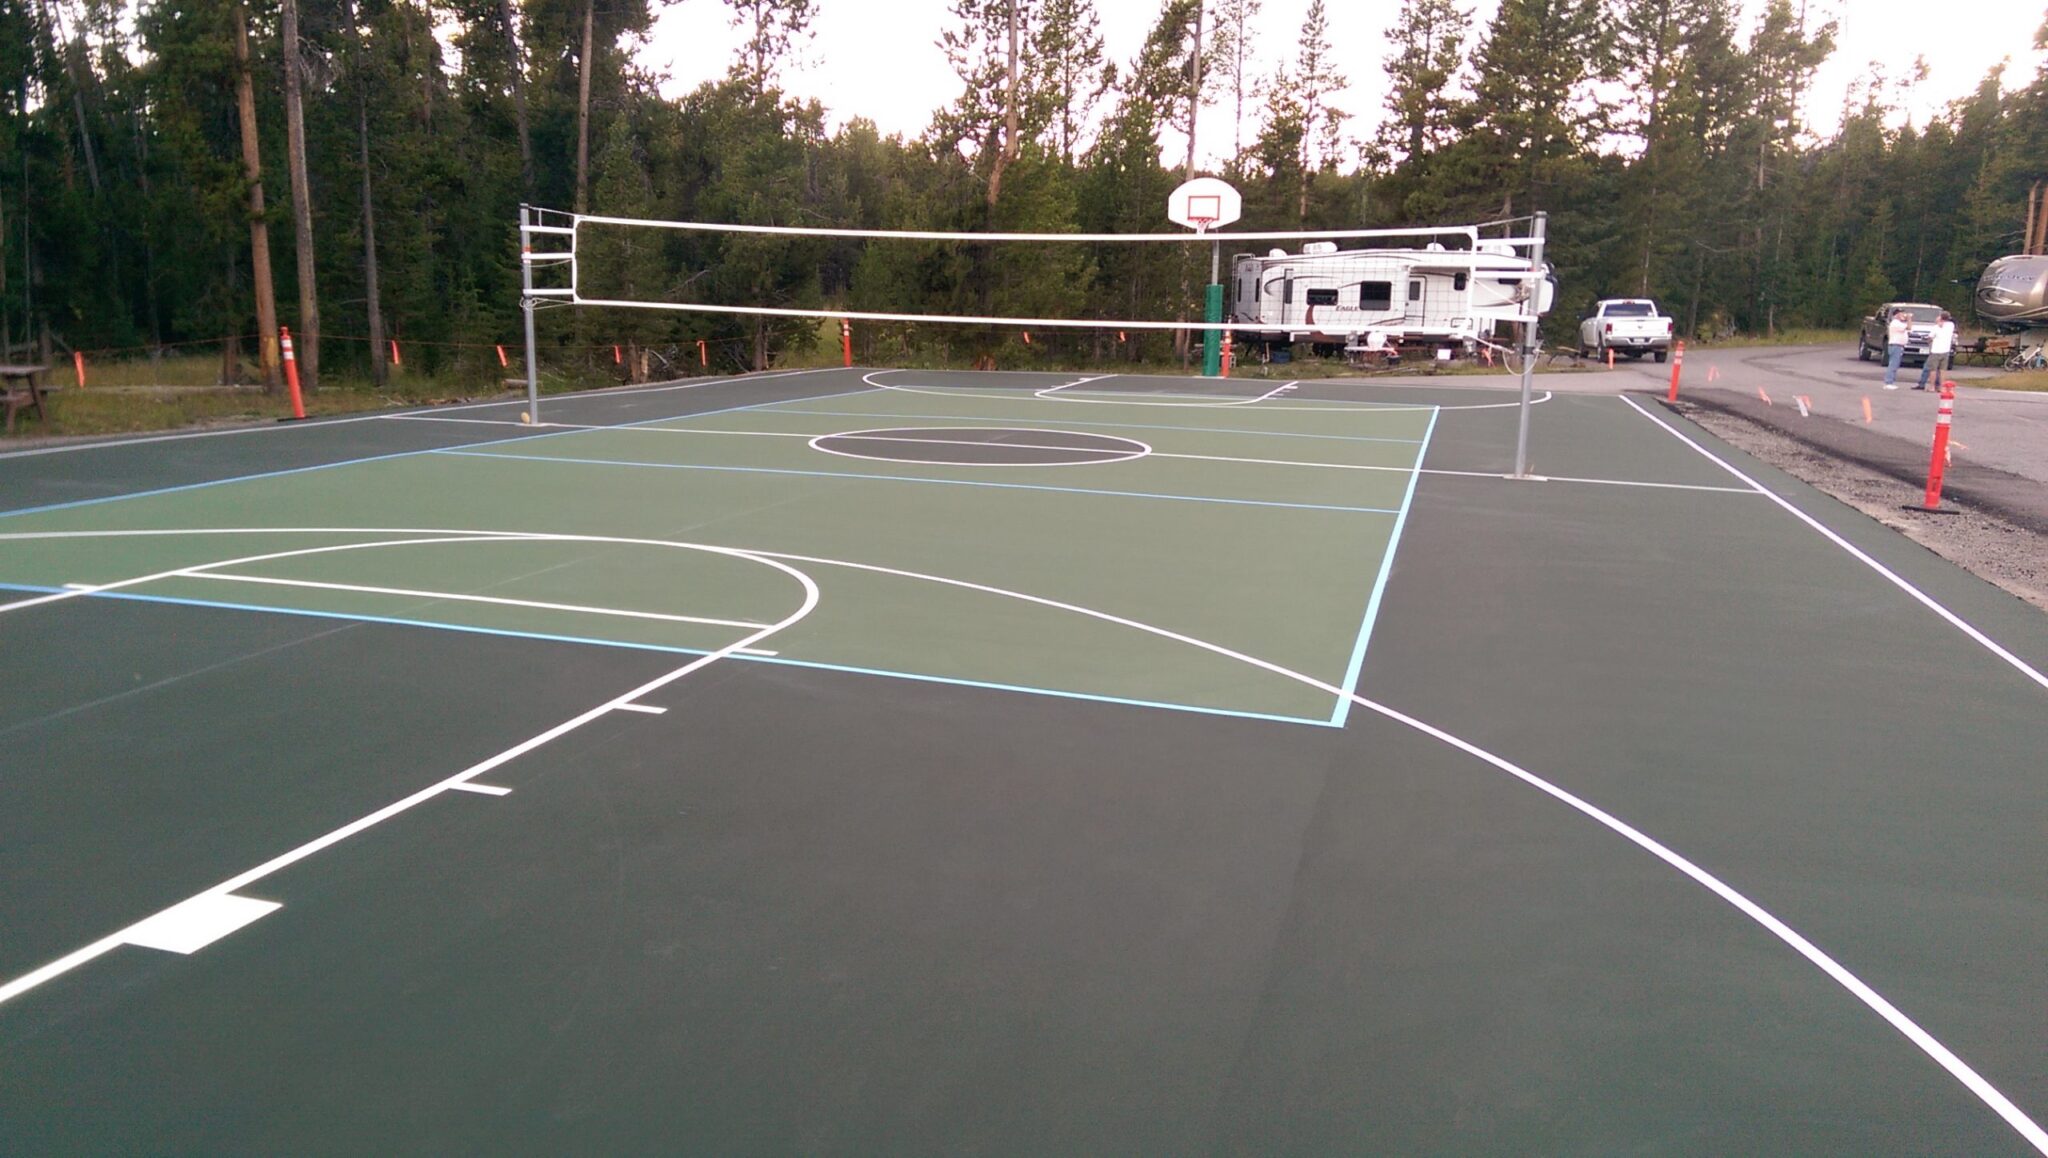 A new court in a campground with lines for volleyball and basketball.